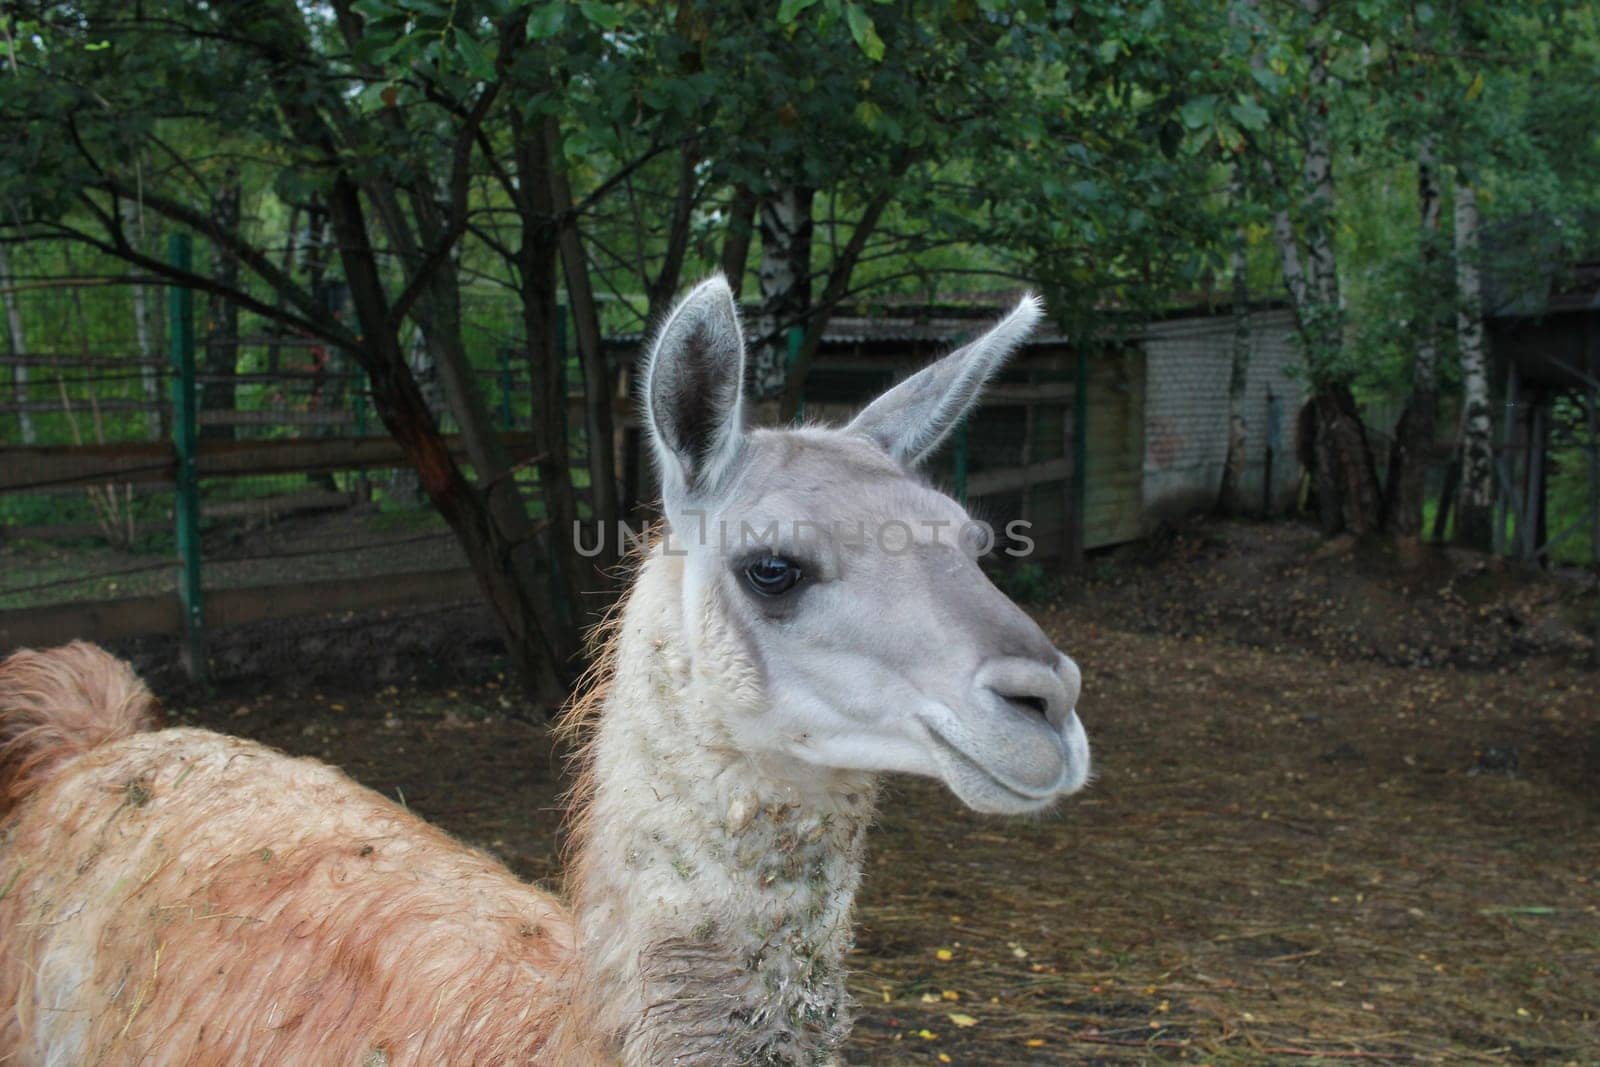 Photo of a llama at the zoo on the playground. Animals in captivity.